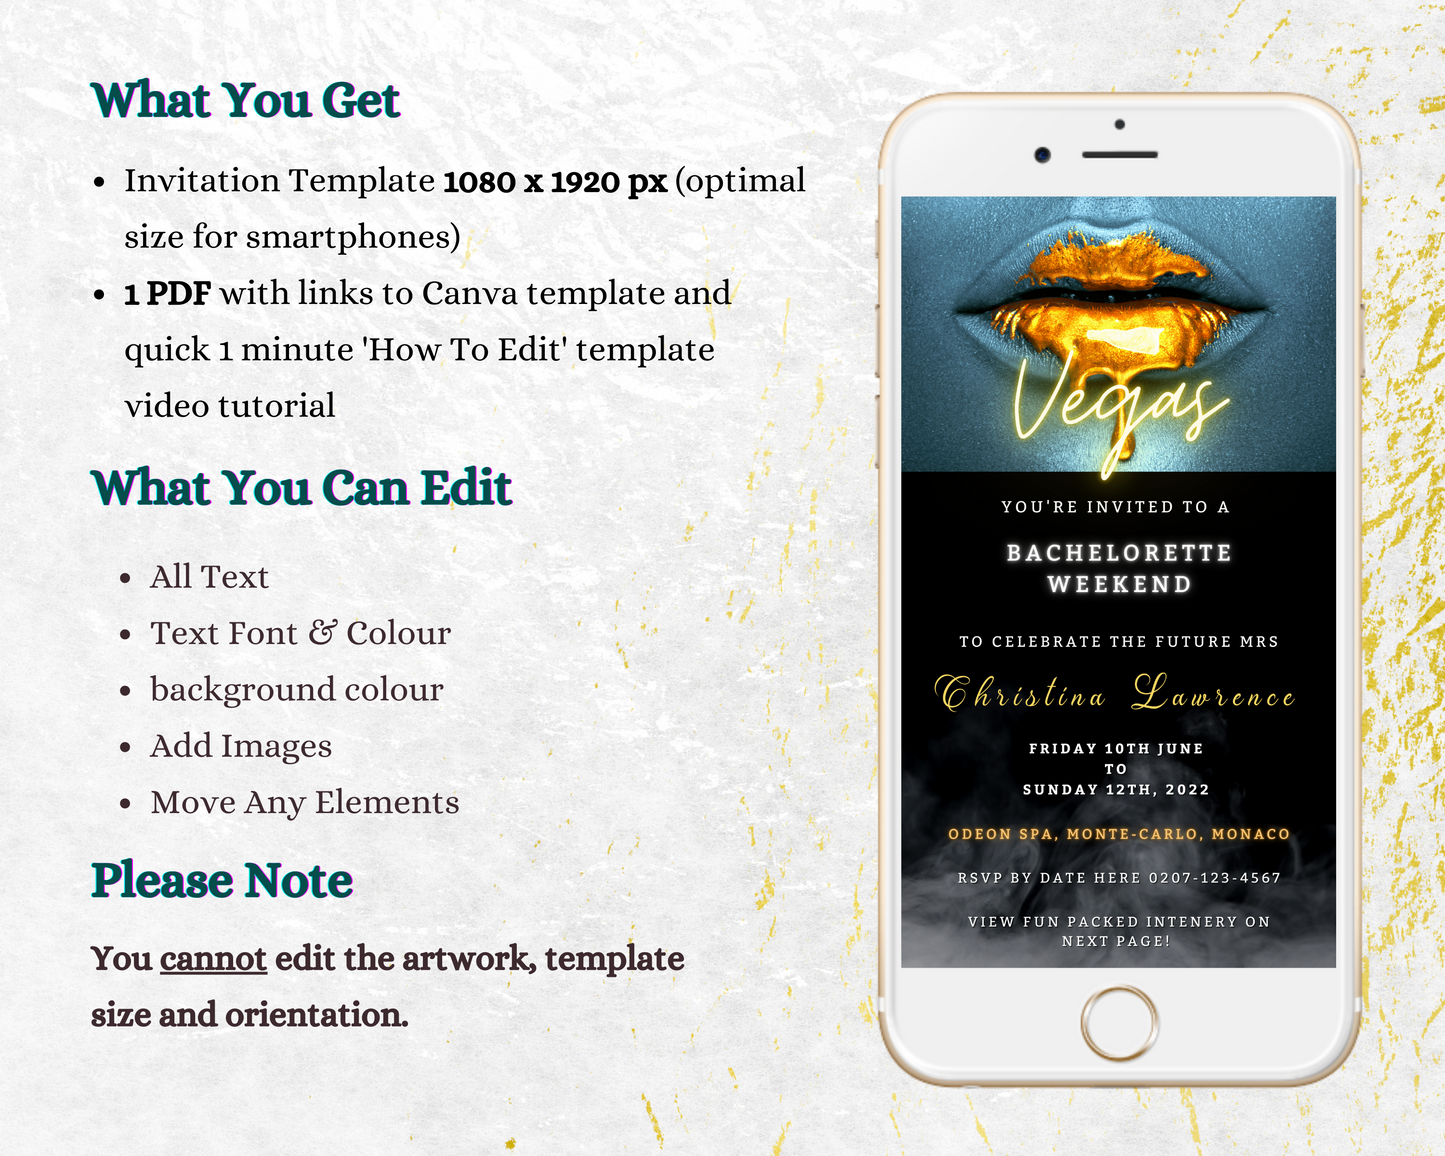 Customizable digital invitation with image of gold-painted lips, designed for Bachelorette Weekend. Editable in Canva, suitable for smartphones. Download and personalize easily.